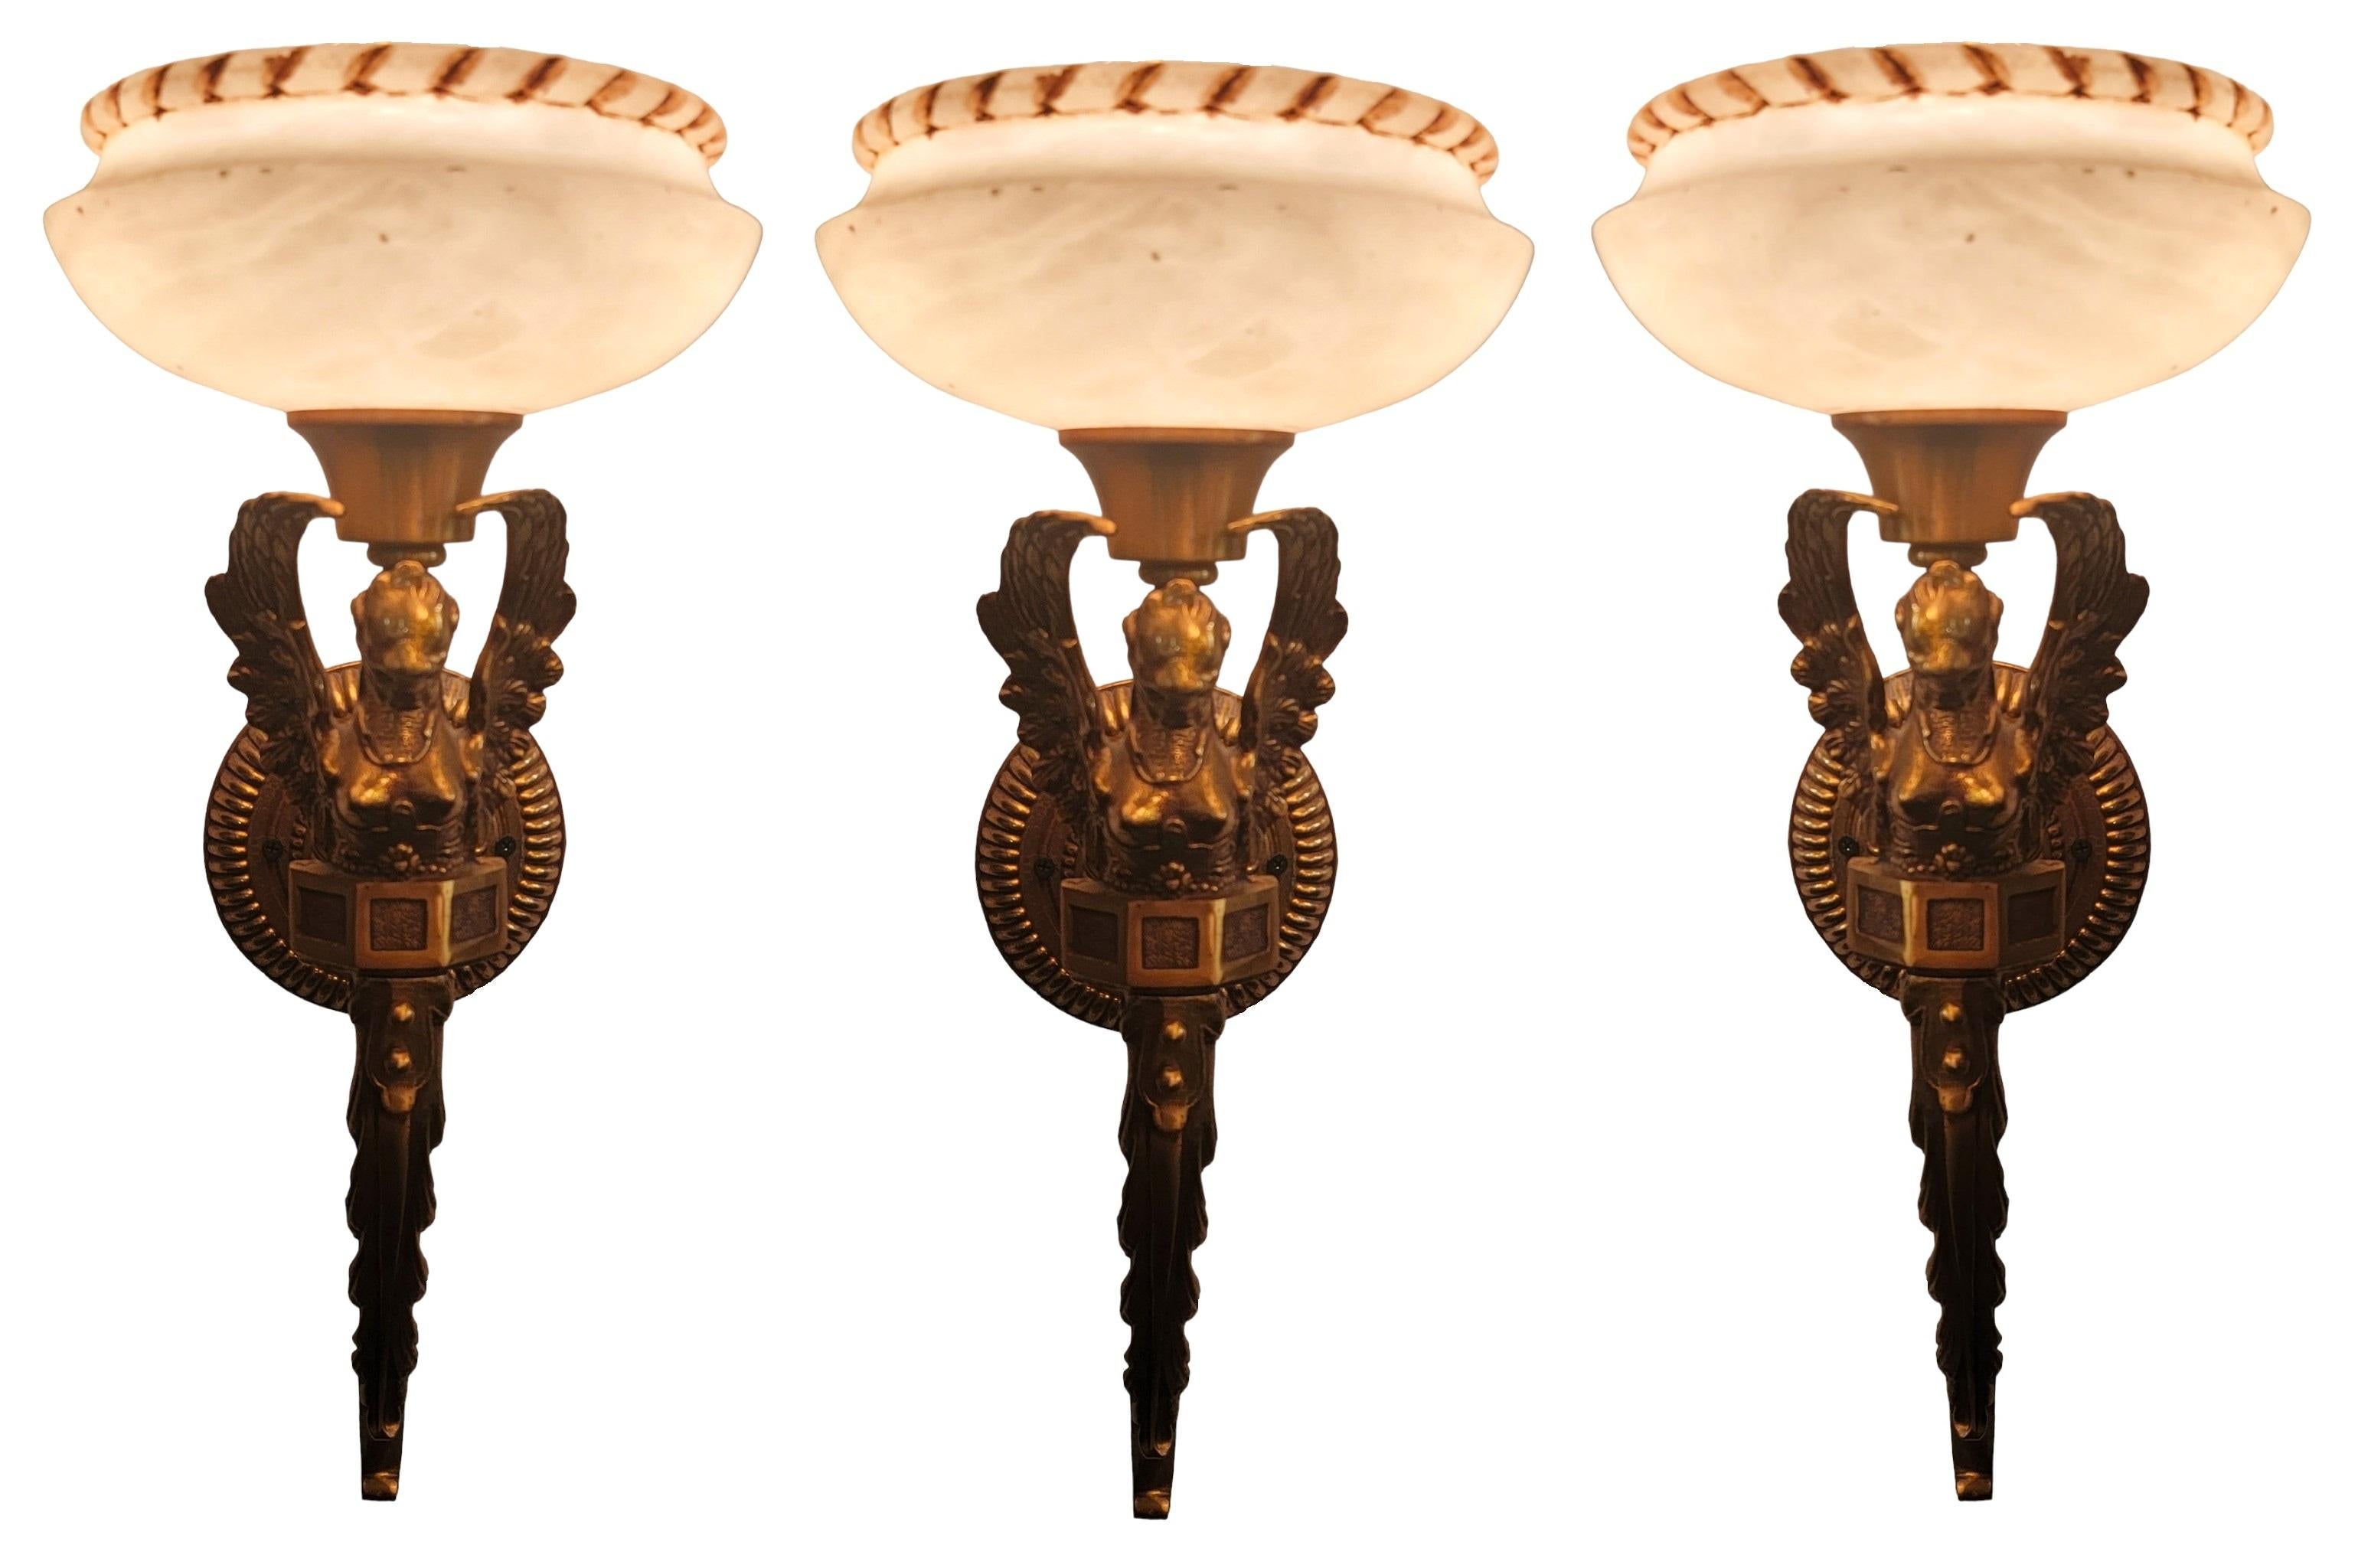 Set of Three French Empire Bronze And Alabaster Sconces measures approx - 20h x 8w x 10d
